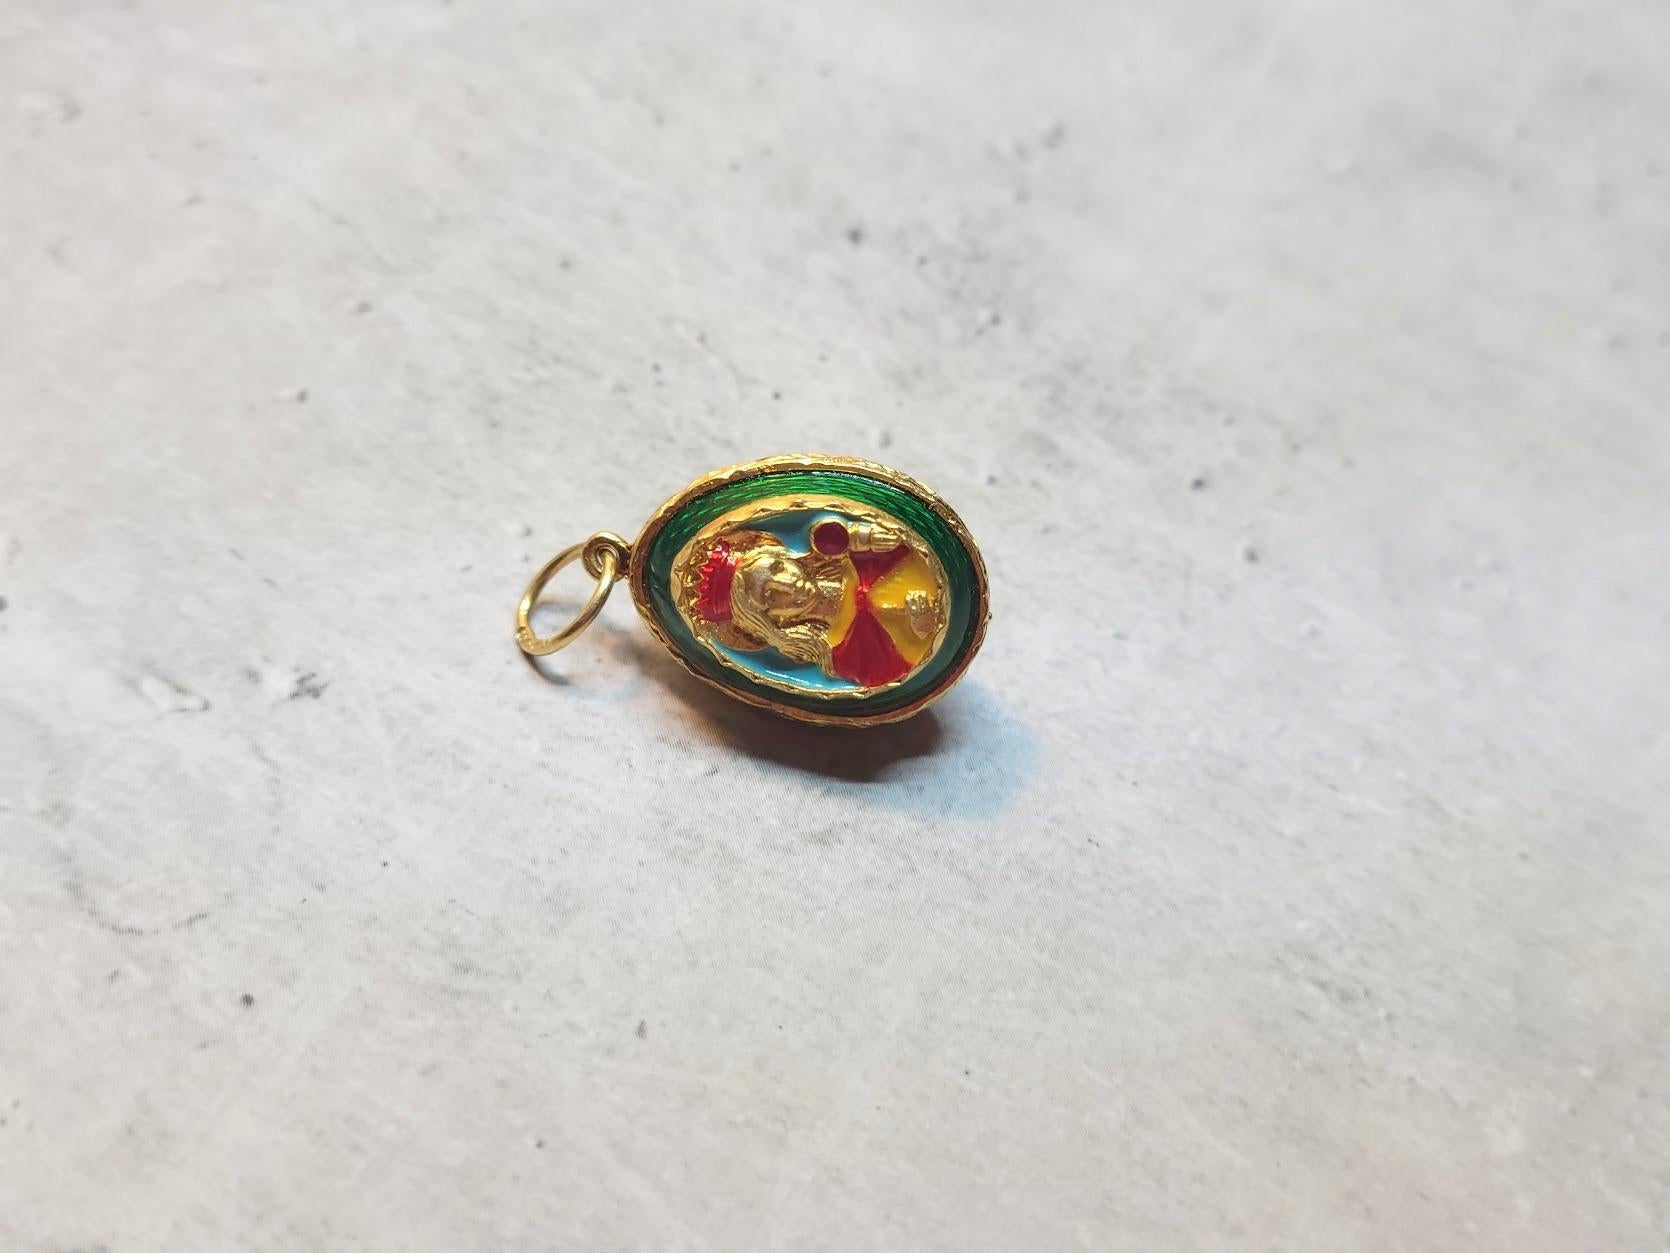 Presenting a stunning pendant designed in the shape of a Russian Imperial 84 gilt silver and enamel egg. This exquisite piece showcases a relief image of the Mother of God, adorned with gold and Guilloche enamel, displaying a captivating emerald